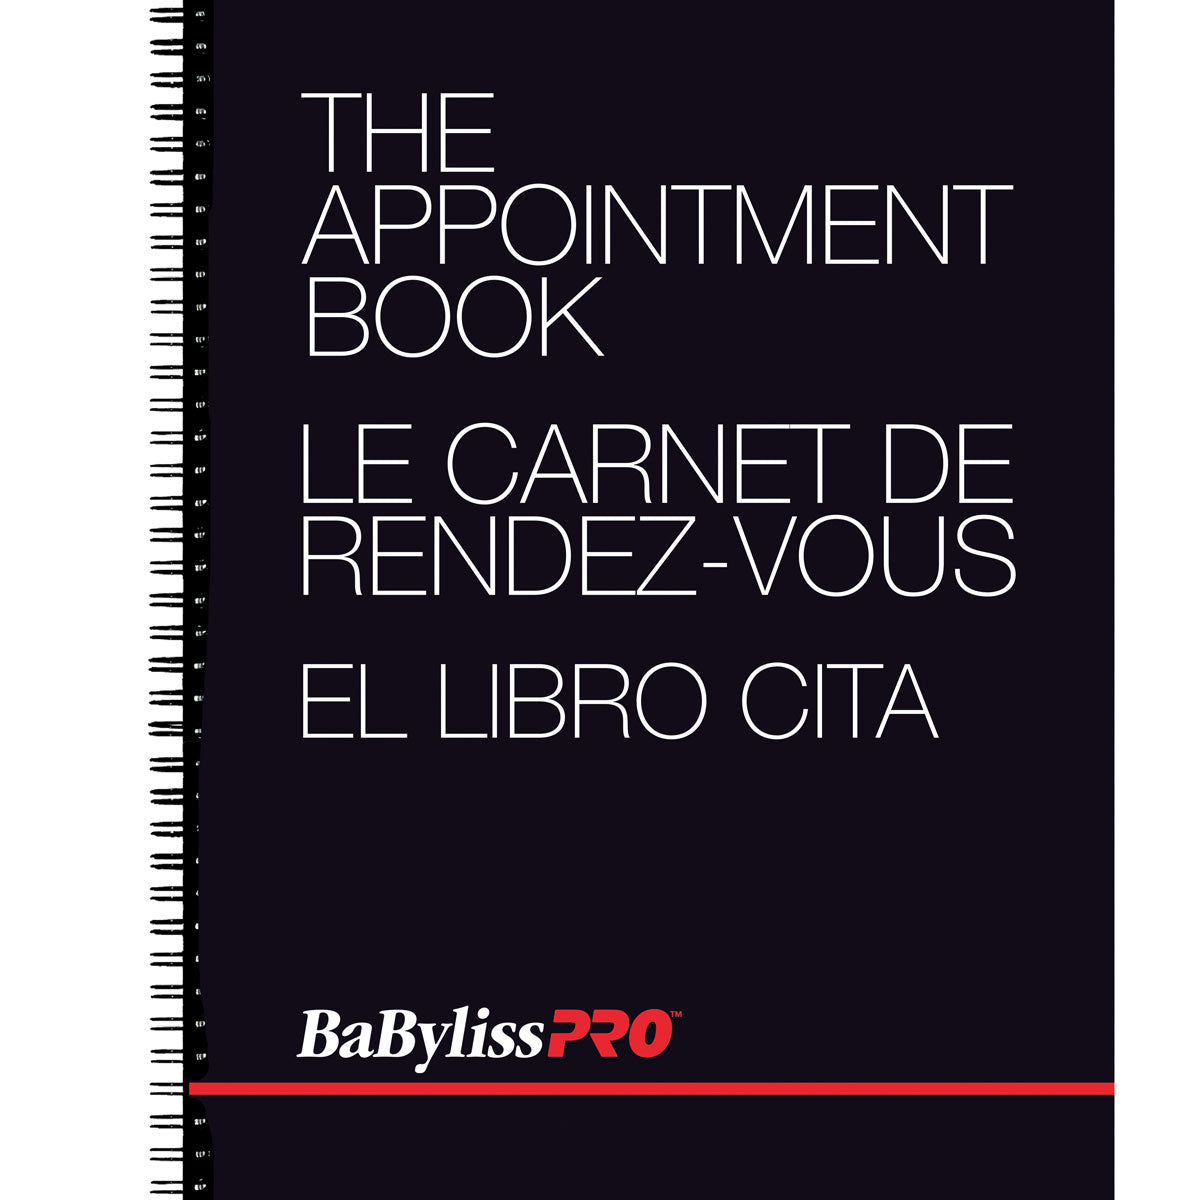 Babyliss Pro 4-column appointment book